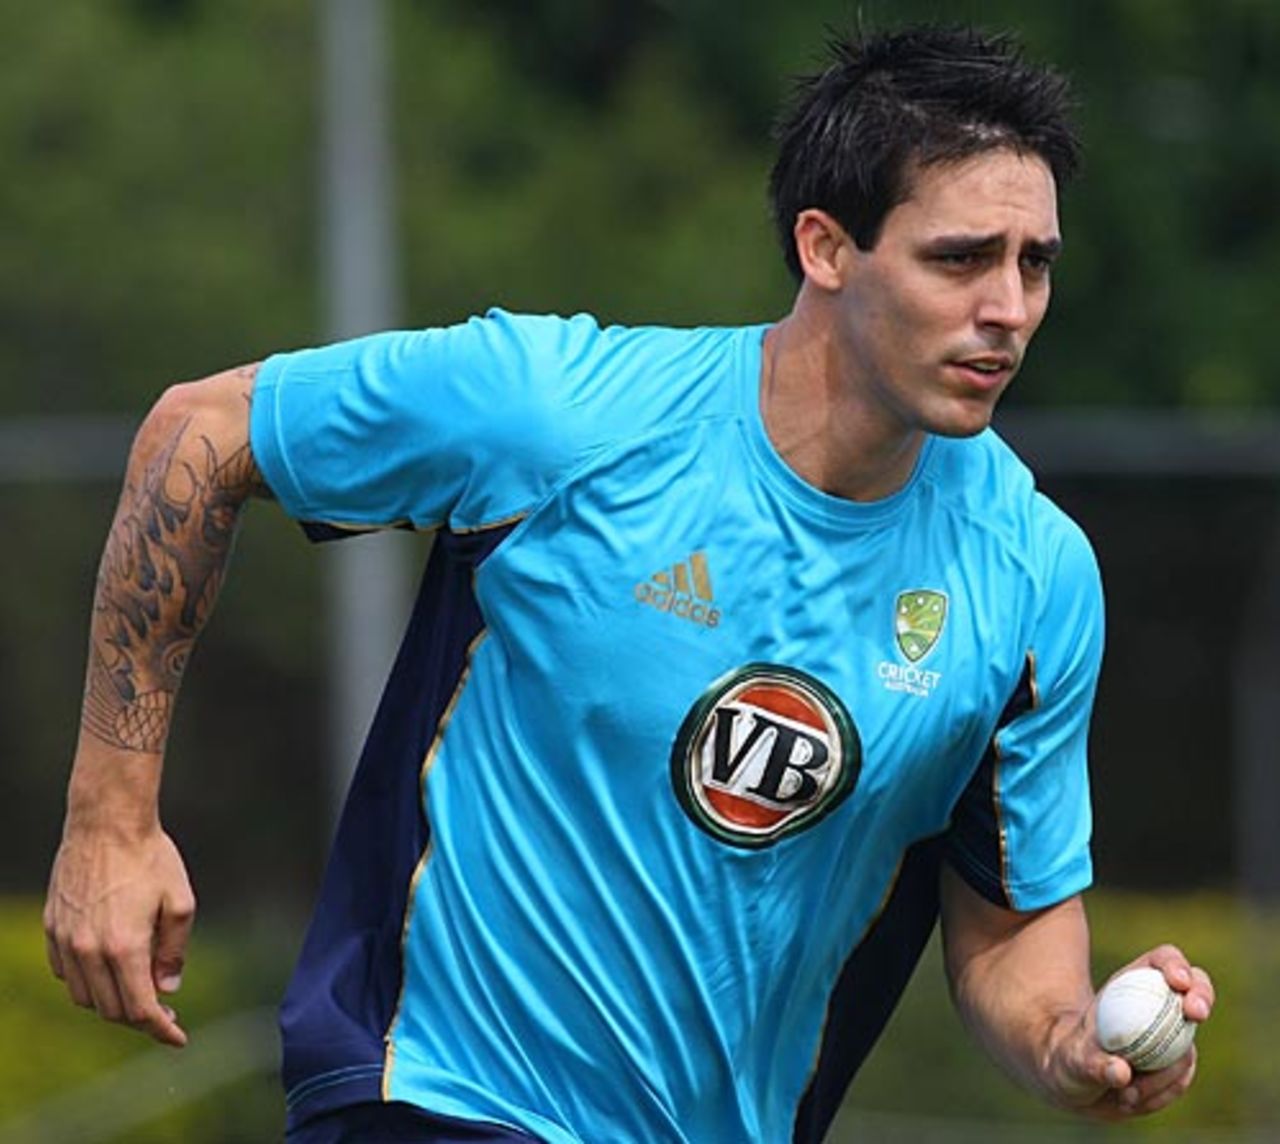 Mitchell Johnson runs in to bowl at a practice session, Brisbane, April 22, 2010